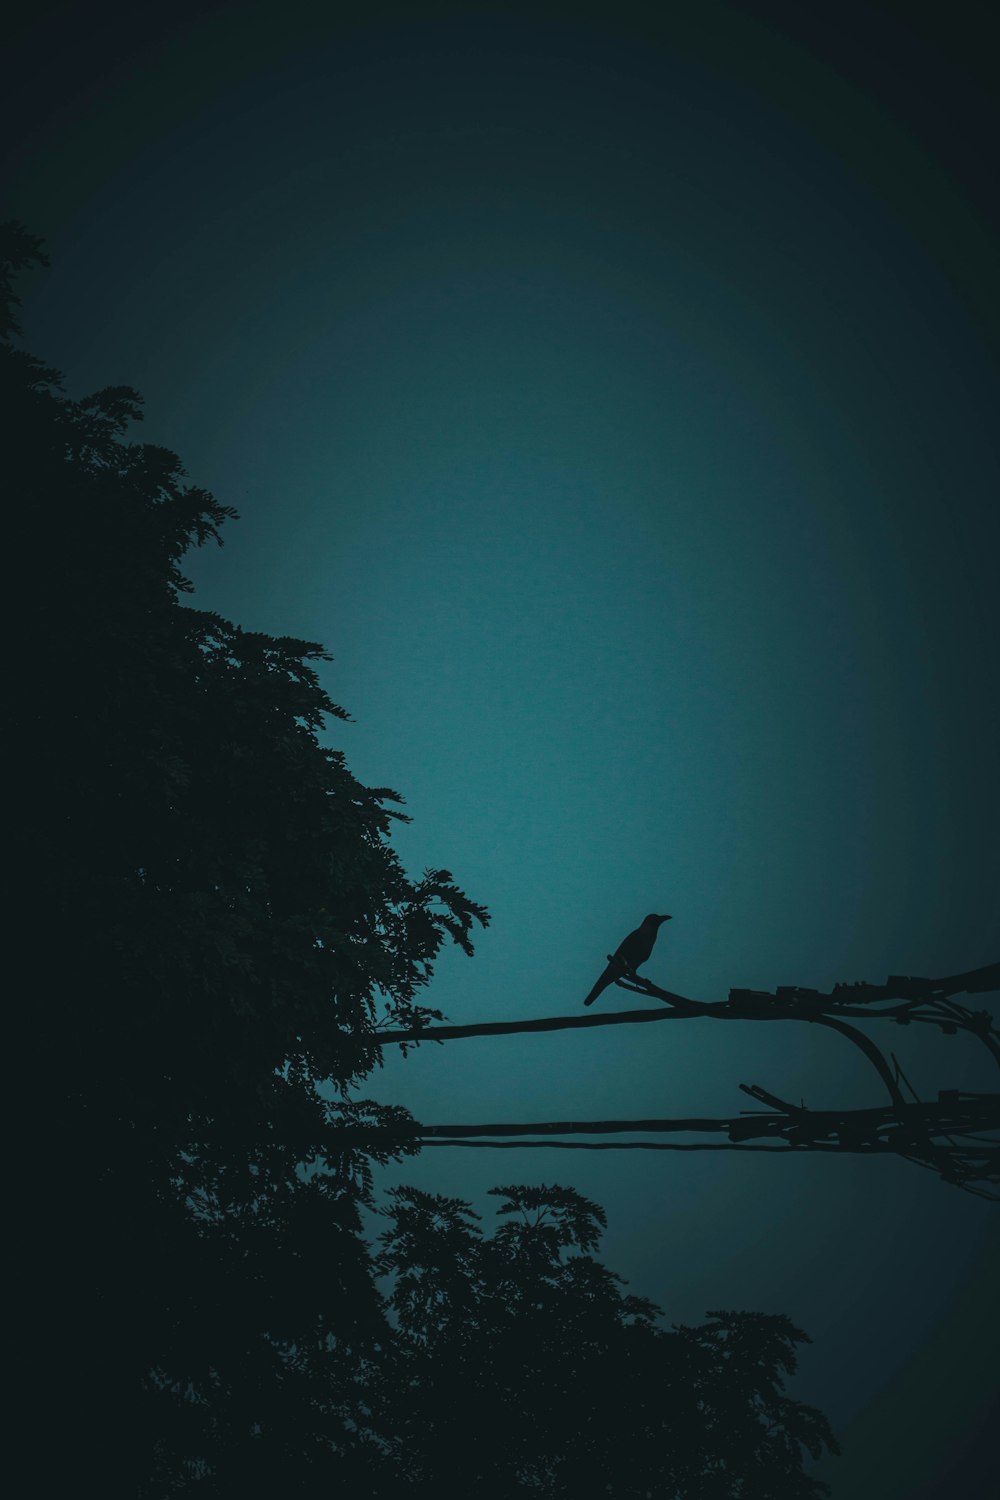 silhouette of bird perched on tree branch during daytime